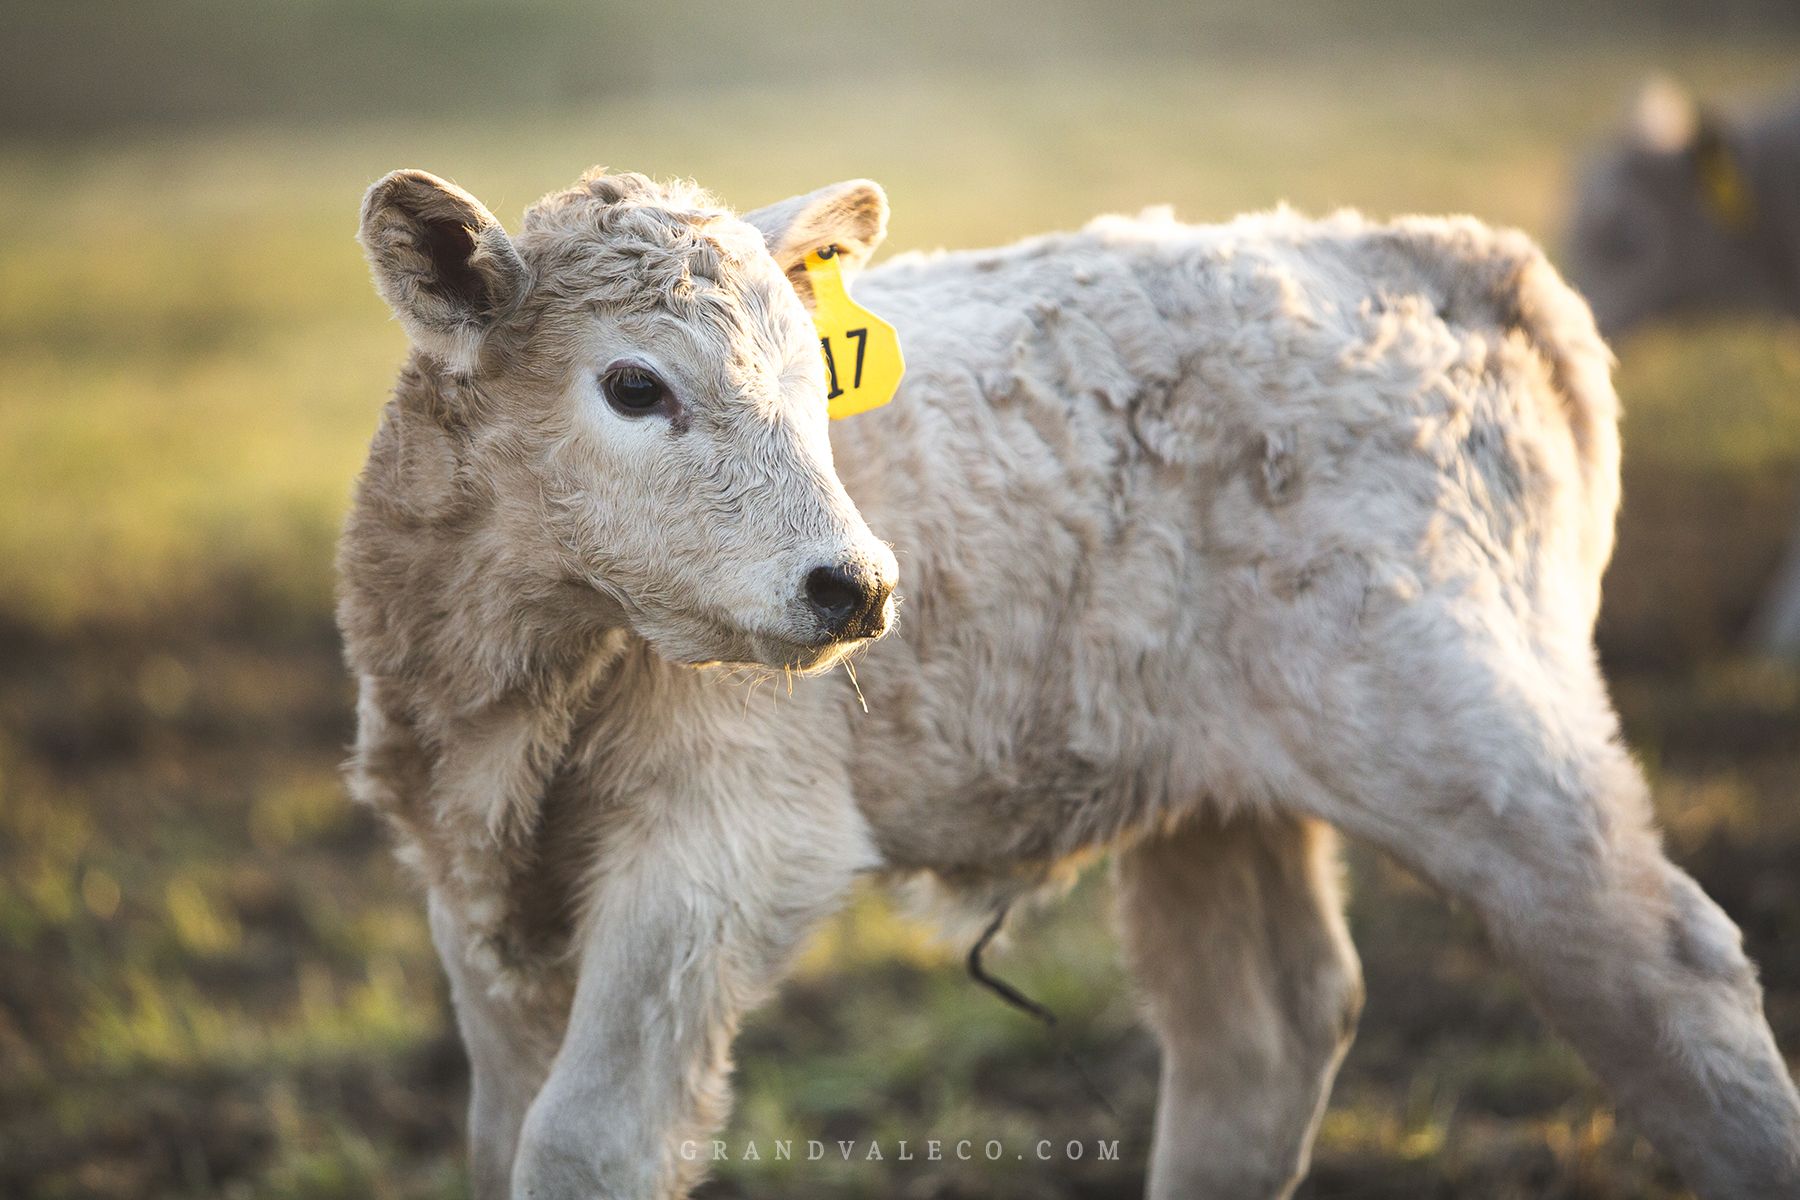 Lookin' at Calf Photos, Thinkin' about Spring | Cattle